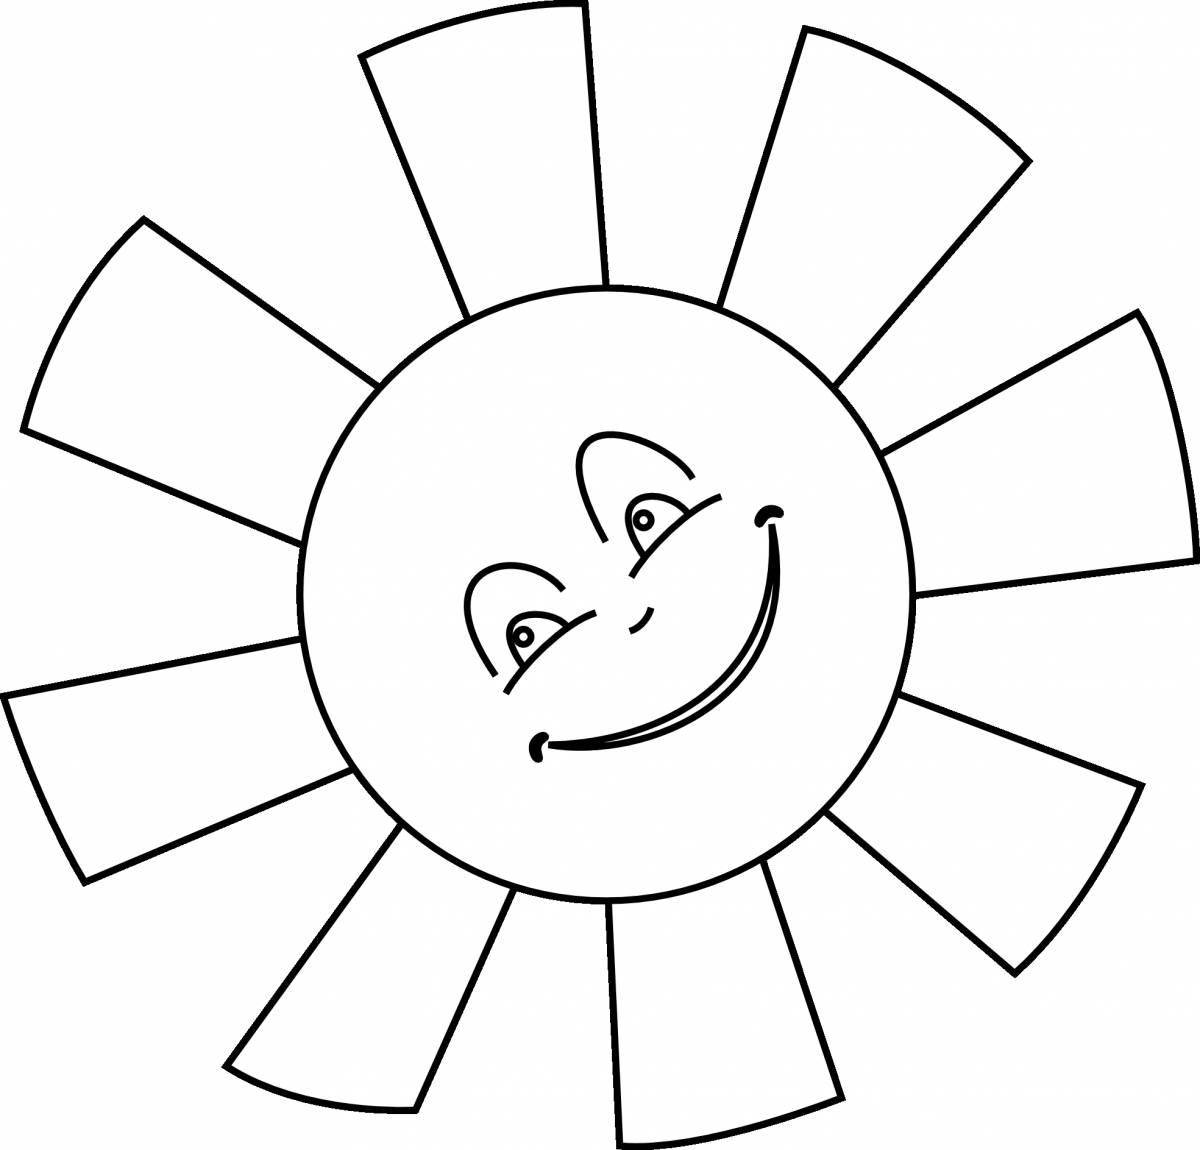 Fancy carnival sun coloring page